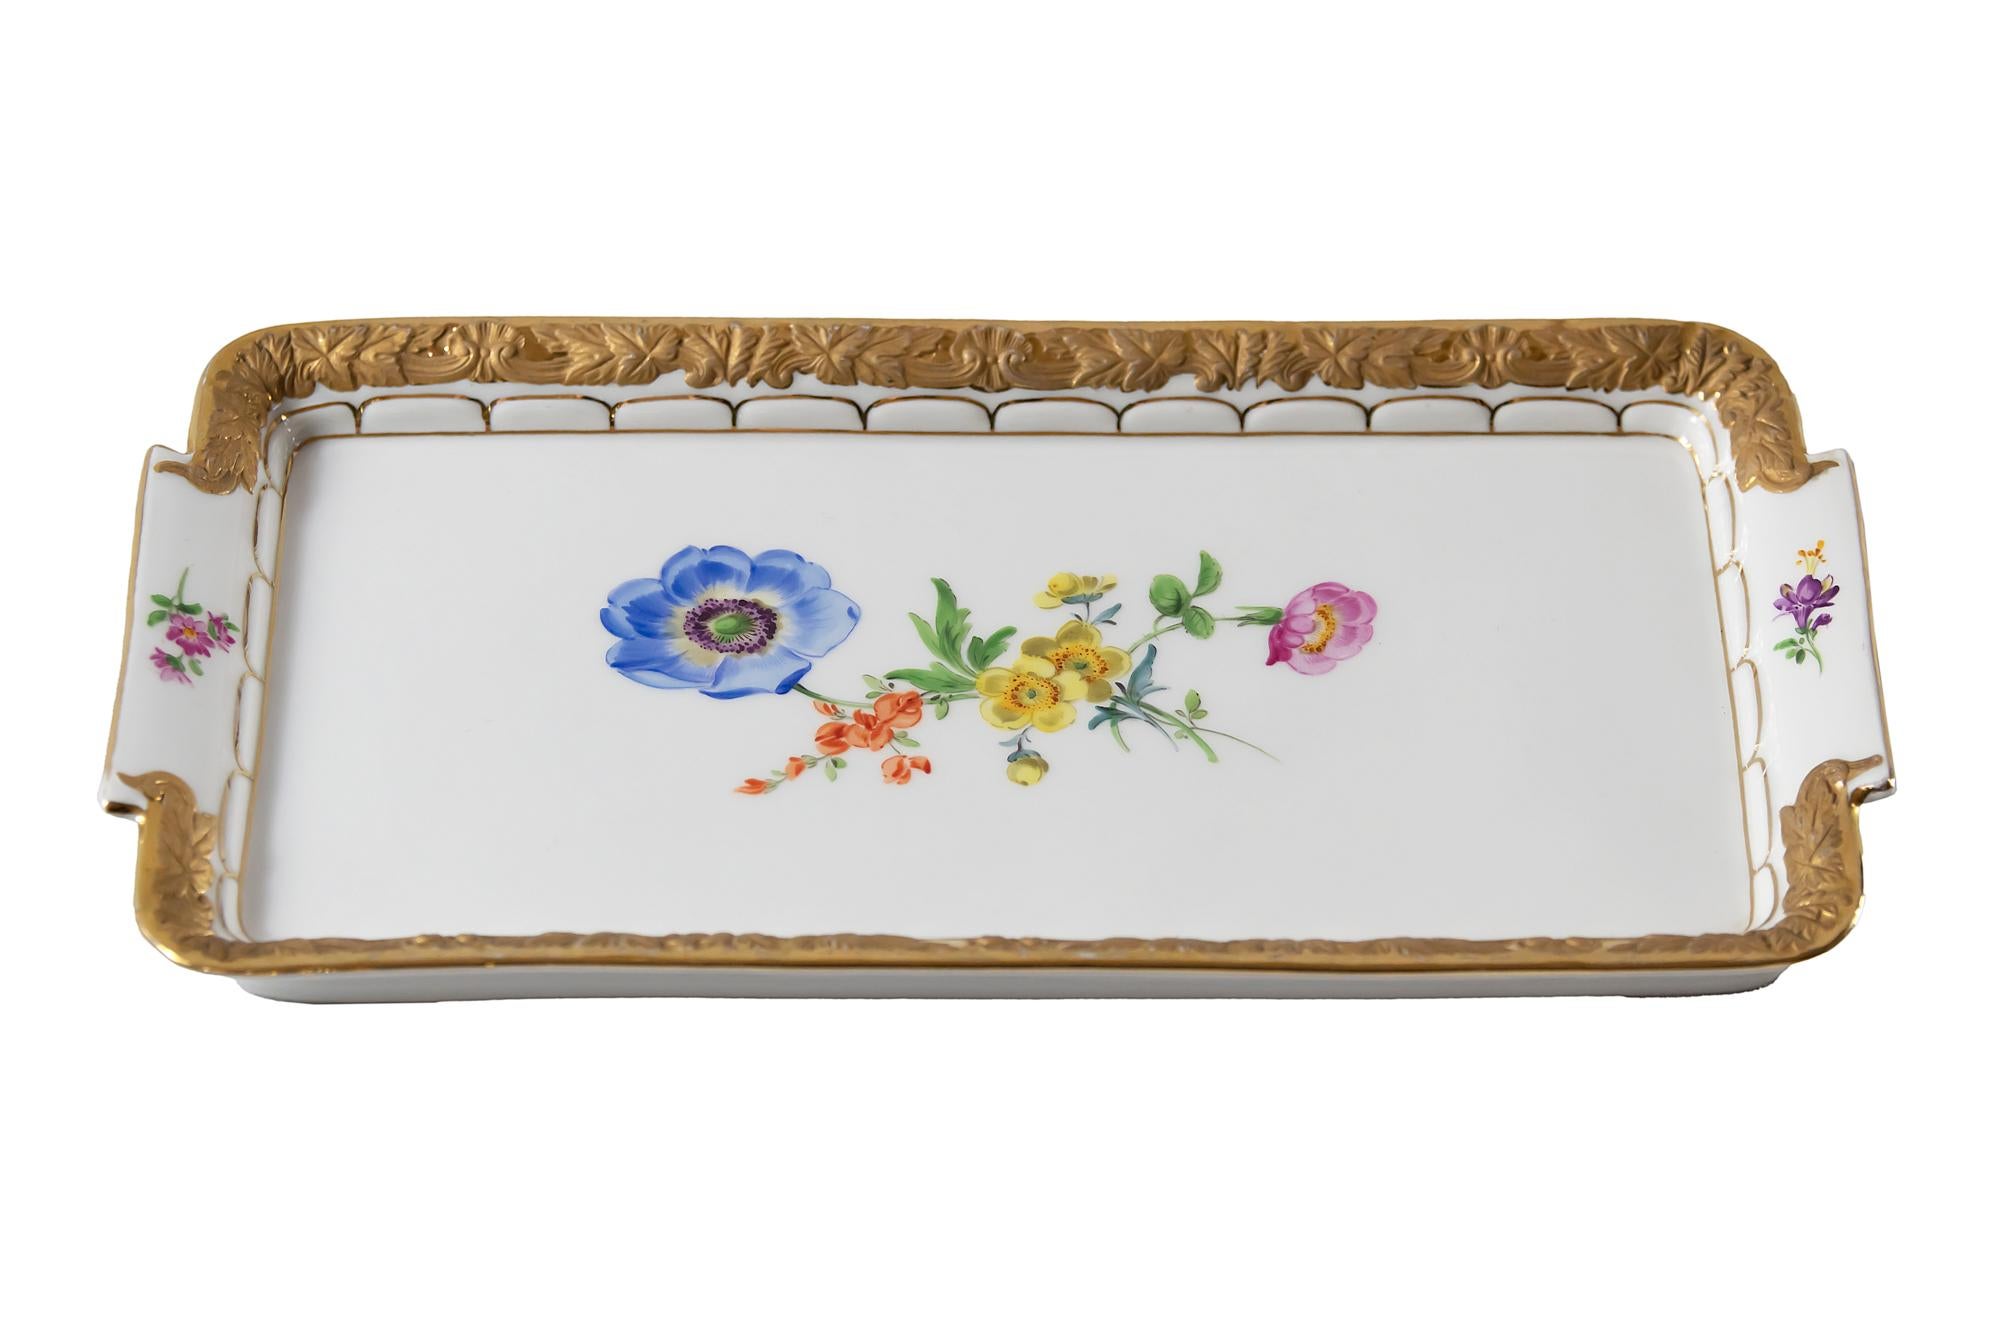 Meissen Porcelain plate/tray with hand painted floral motives and rich gold decor.